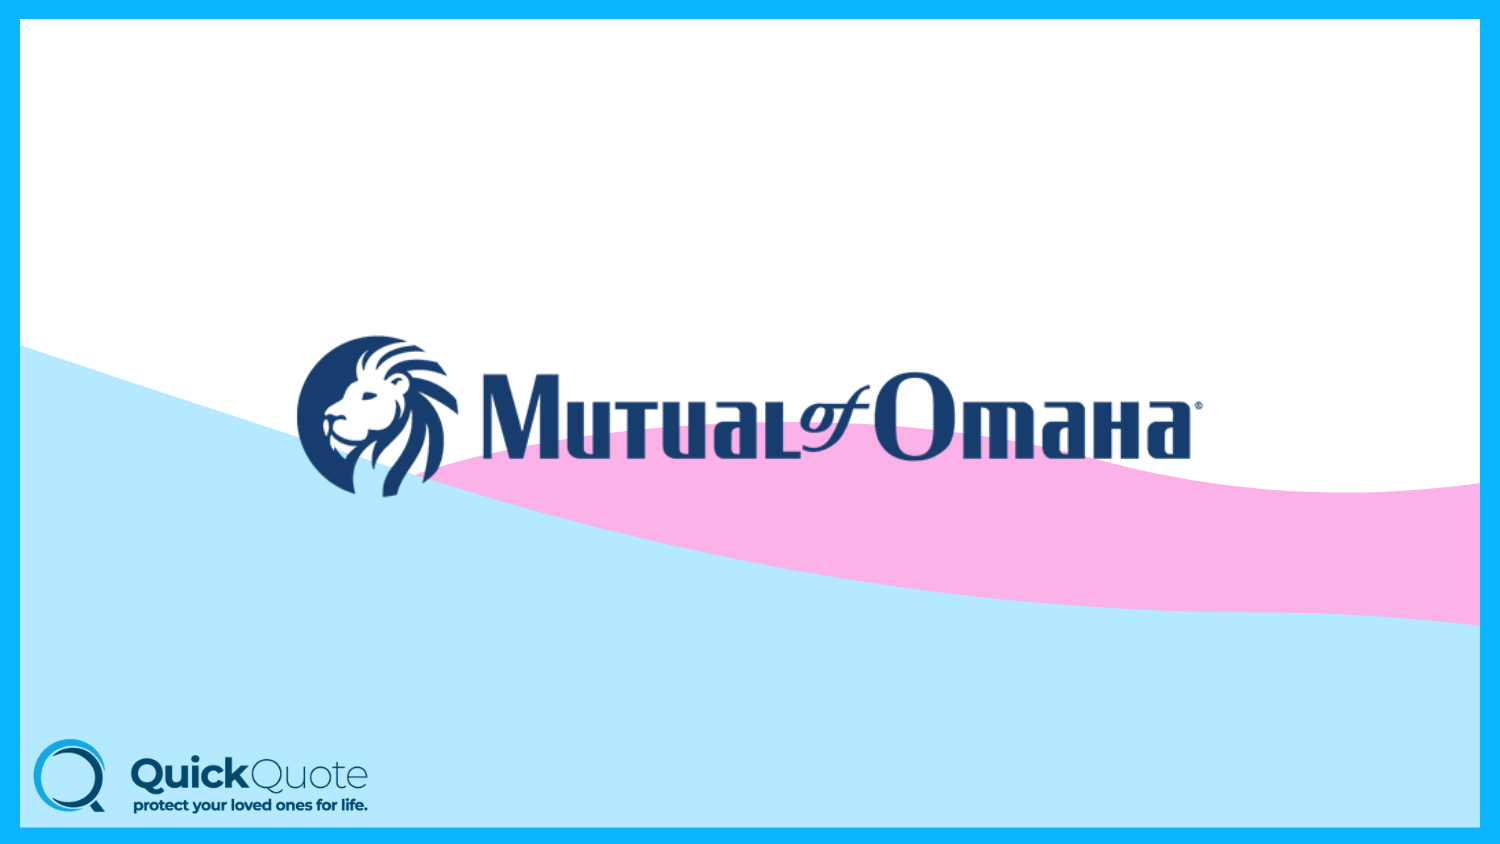 Mutual of Omaha: Best Life Insurance for Seniors 